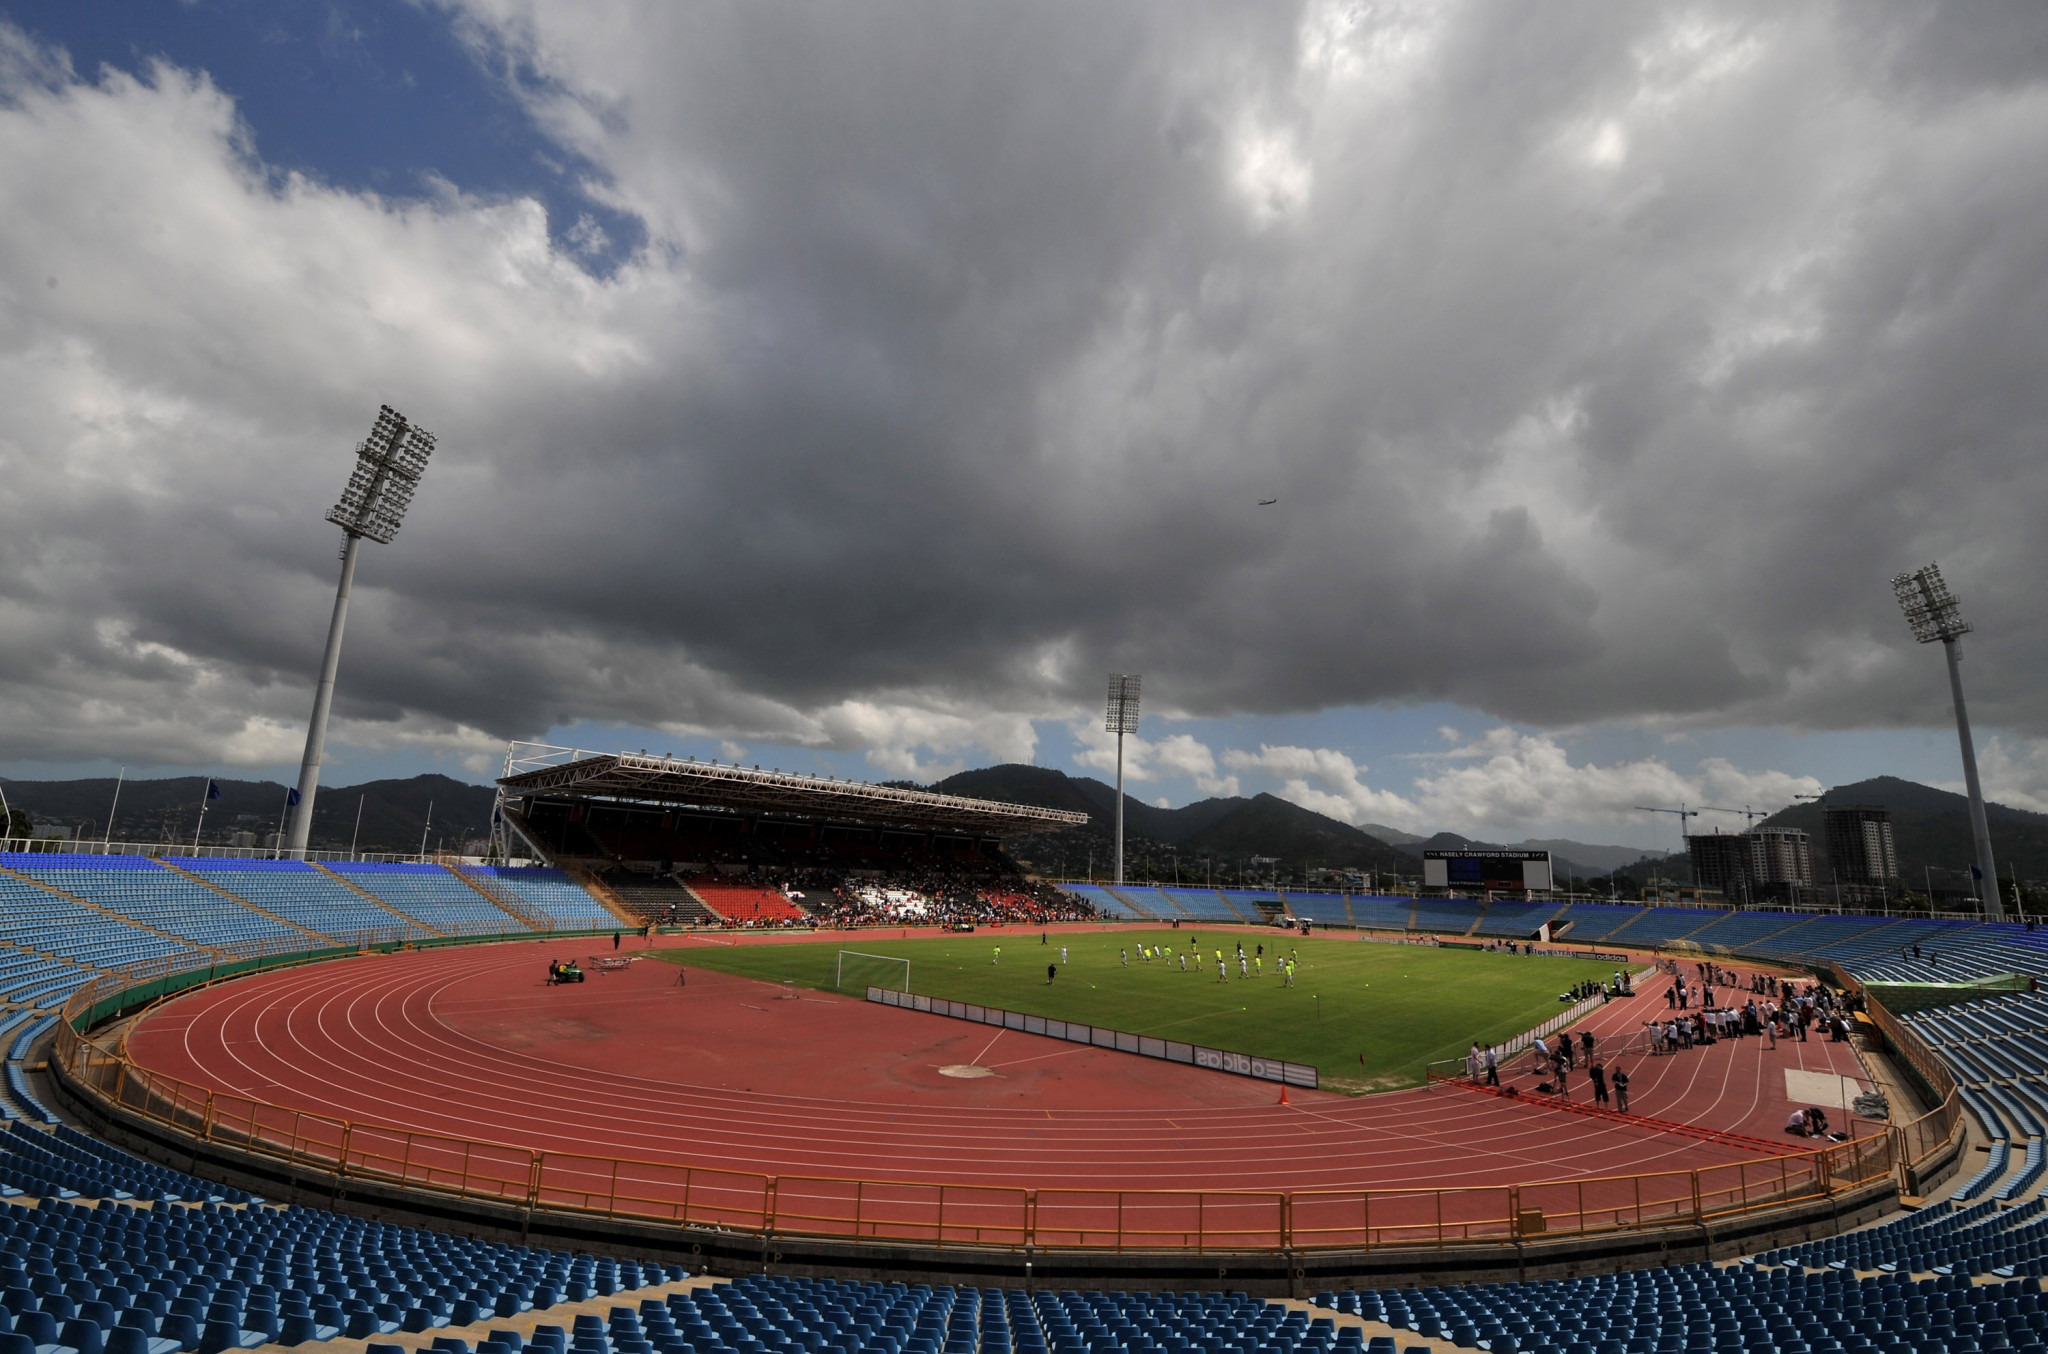 The Commonwealth Youth Games are scheduled for August 4 to 11 in Trinidad and Tobago ©Getty Images